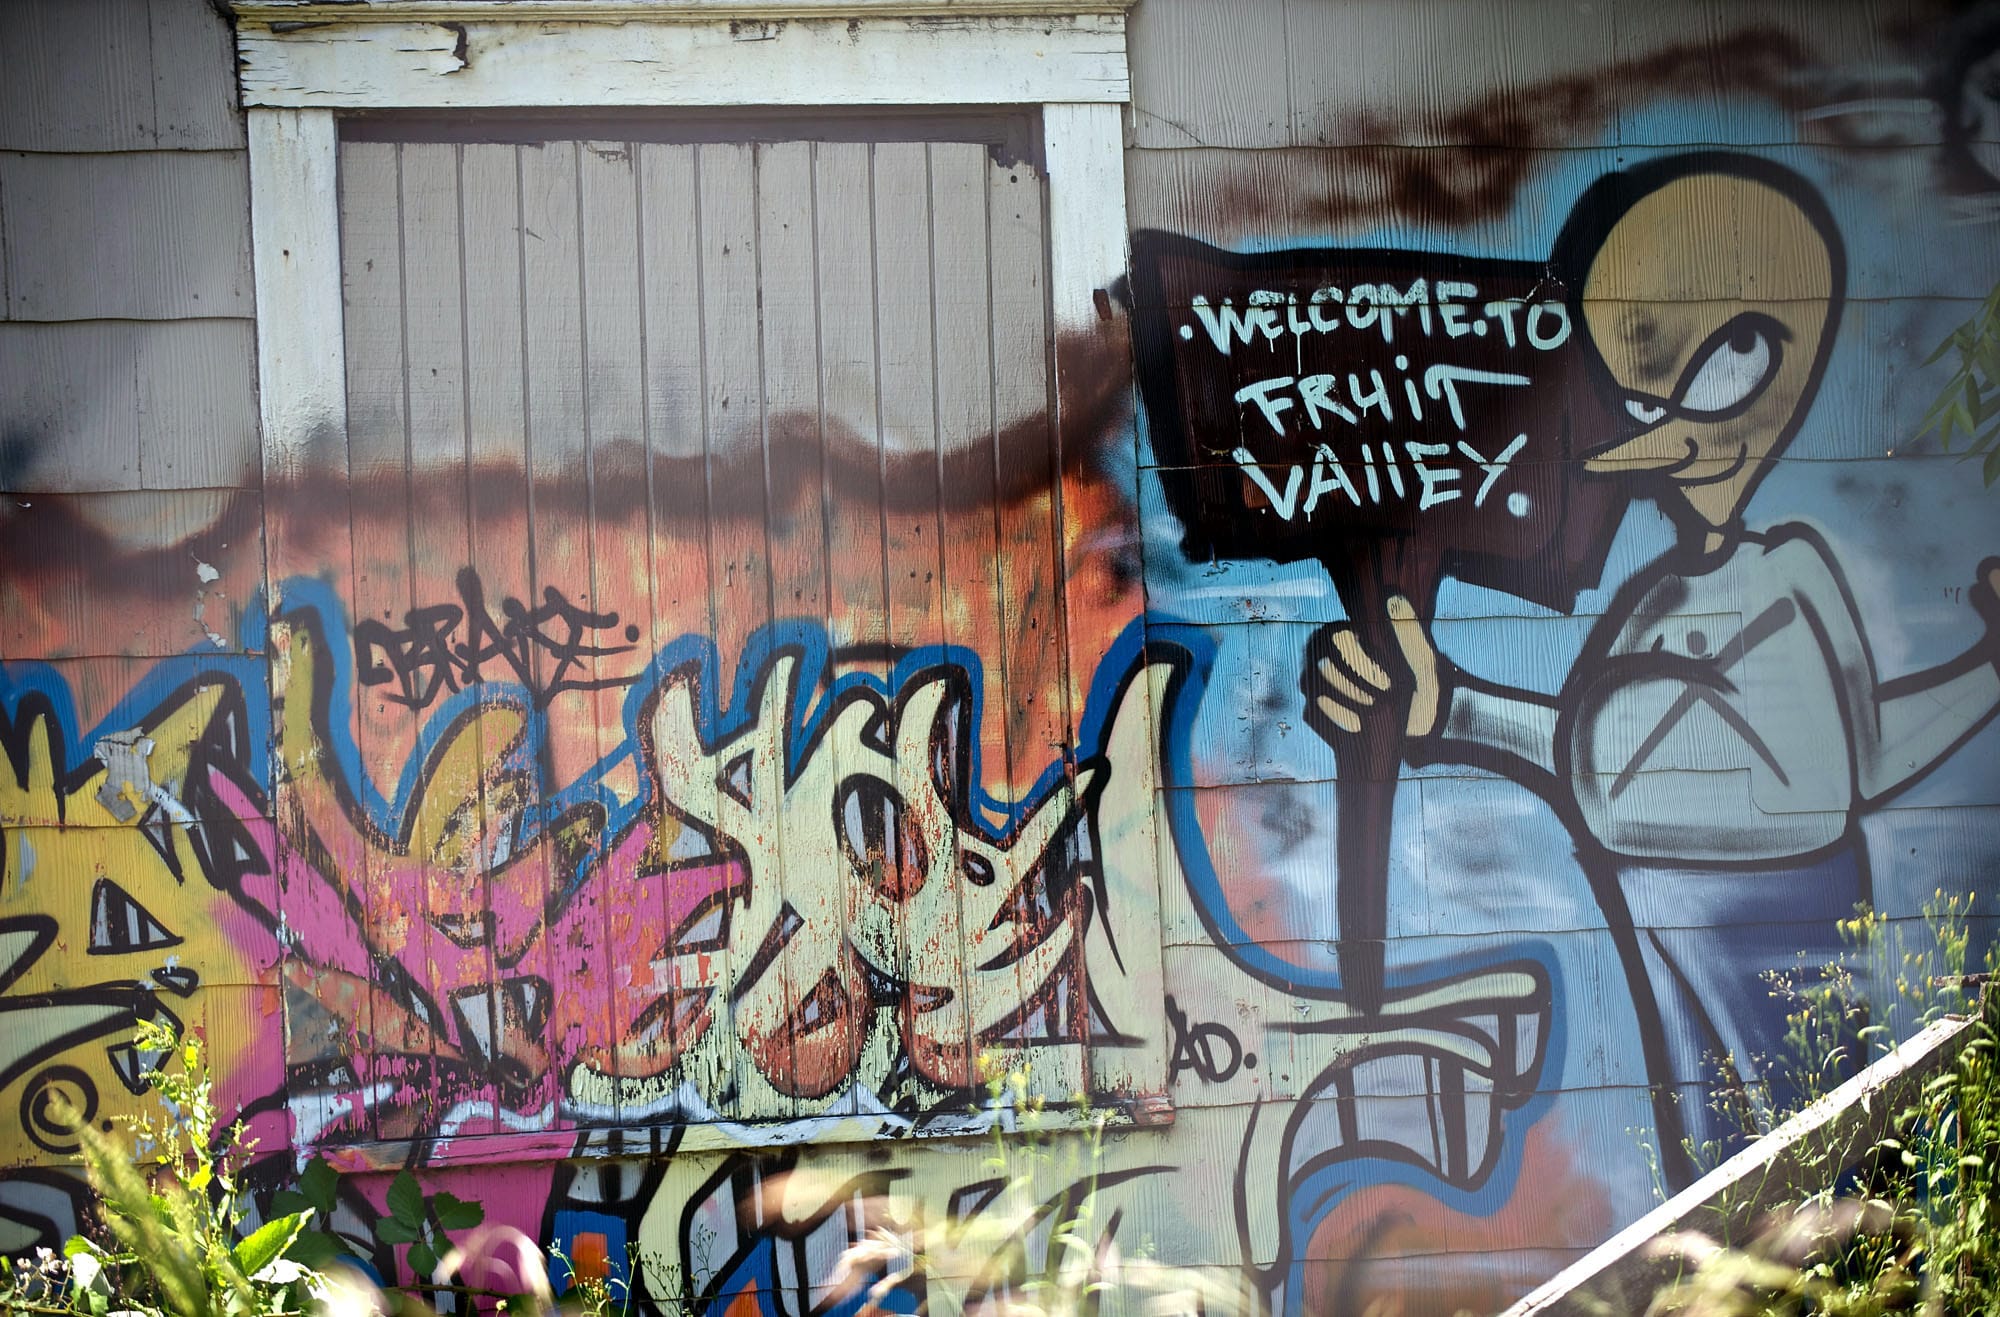 Graffiti on a longtime problem house on Fruit Valley Road was the subject of an order by the city of Vancouver, requiring owner Paul Johnston to bring the building up to code or it will be demolished.